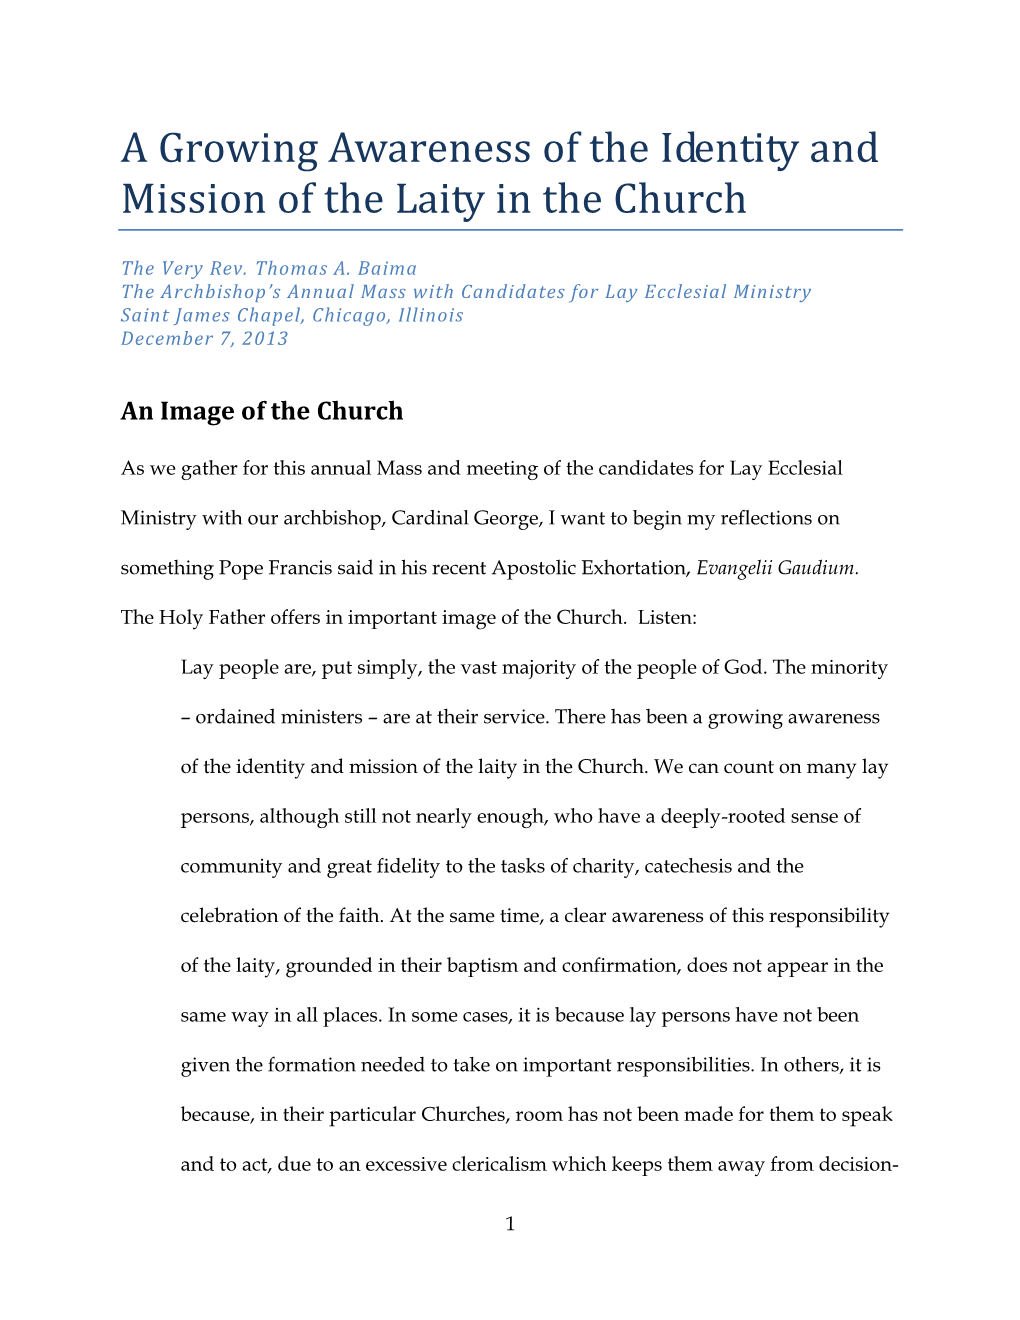 A Growing Awareness of the Identity and Mission of the Laity in the Church